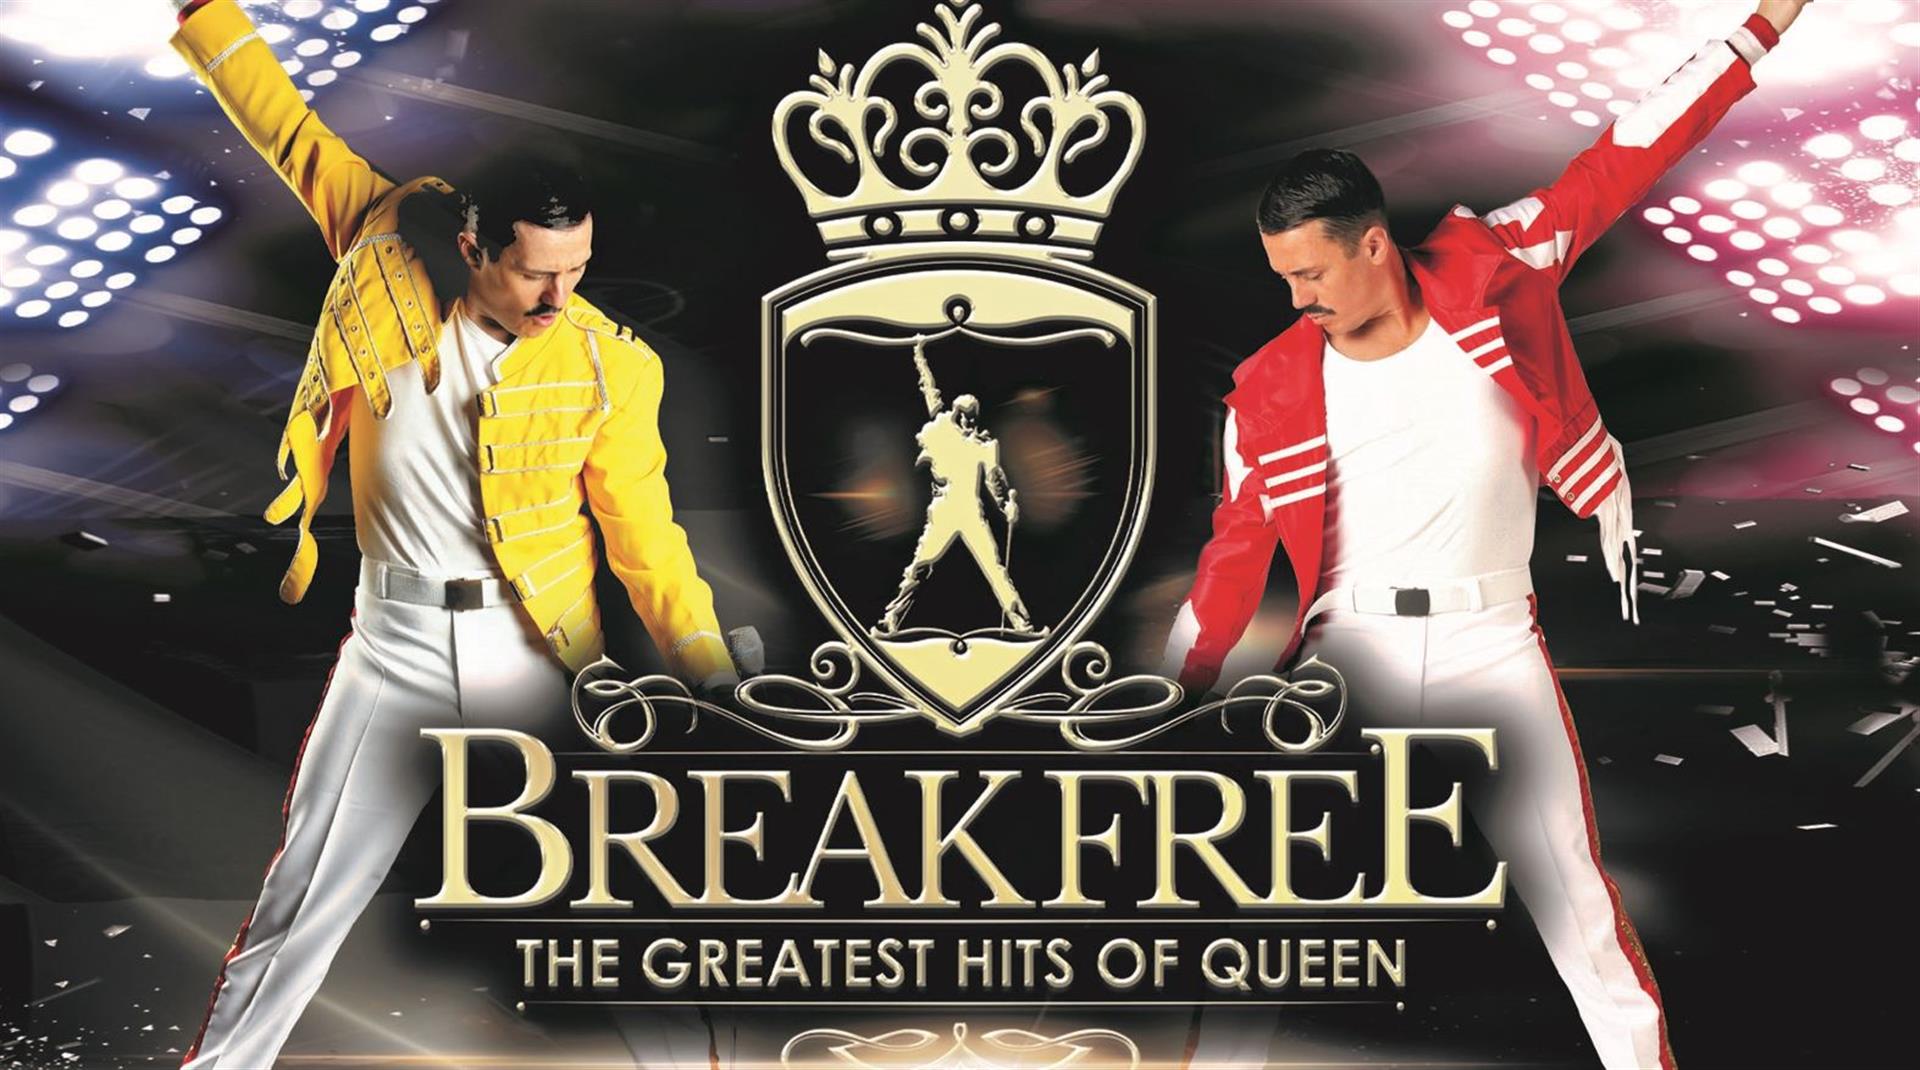 Break Free – The Greatest Hits Of Queen - Lowther Pavilion